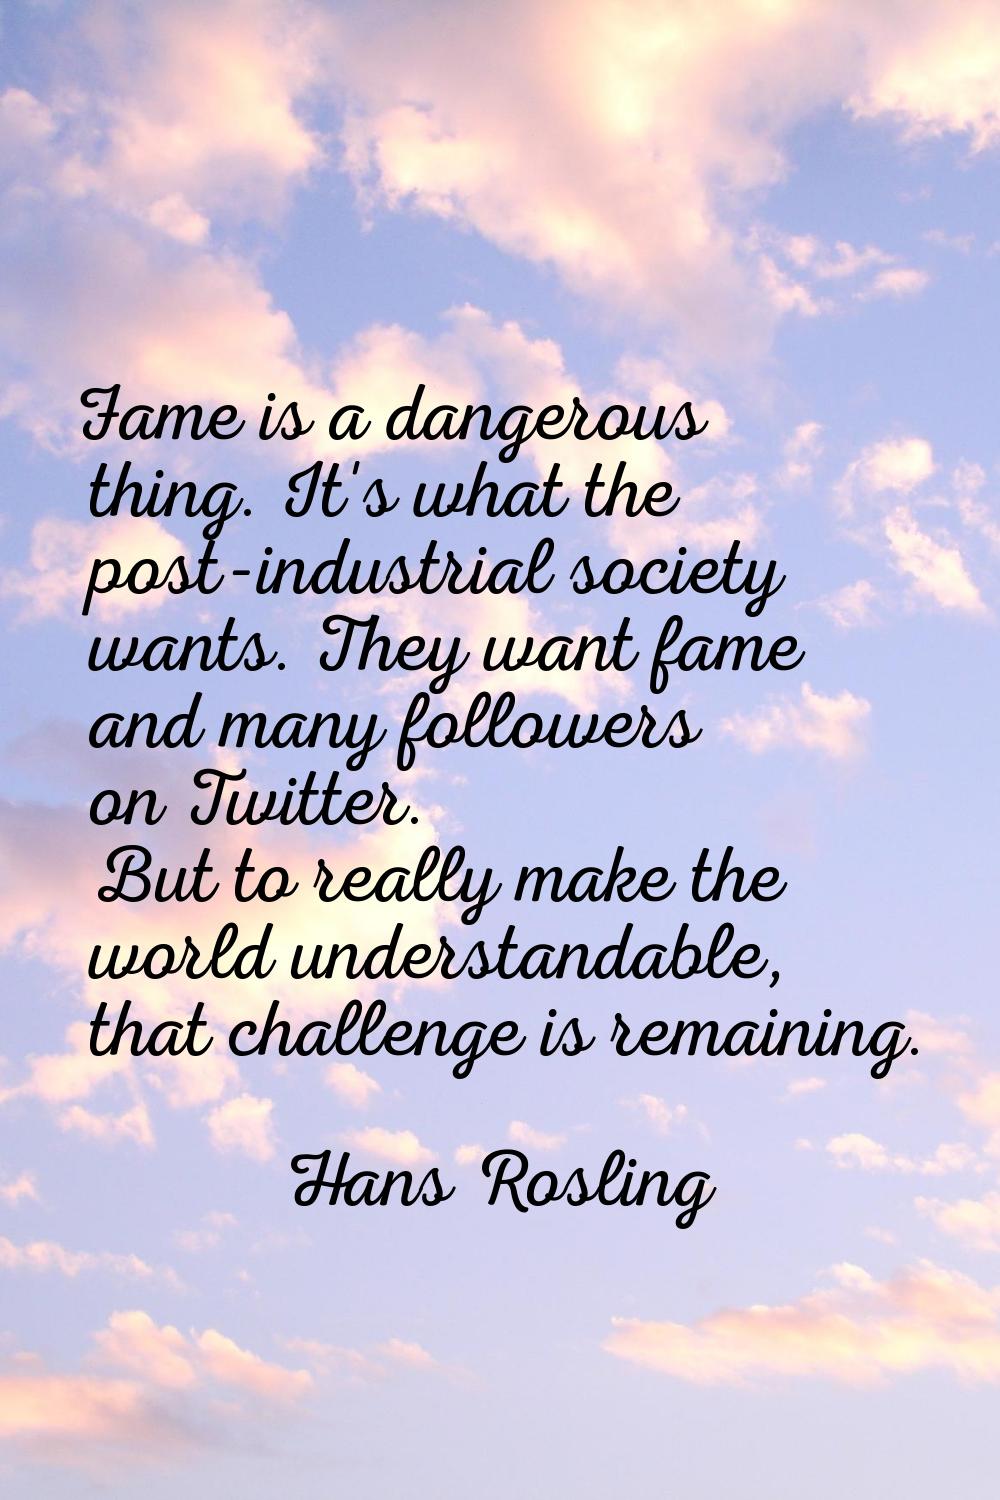 Fame is a dangerous thing. It's what the post-industrial society wants. They want fame and many fol